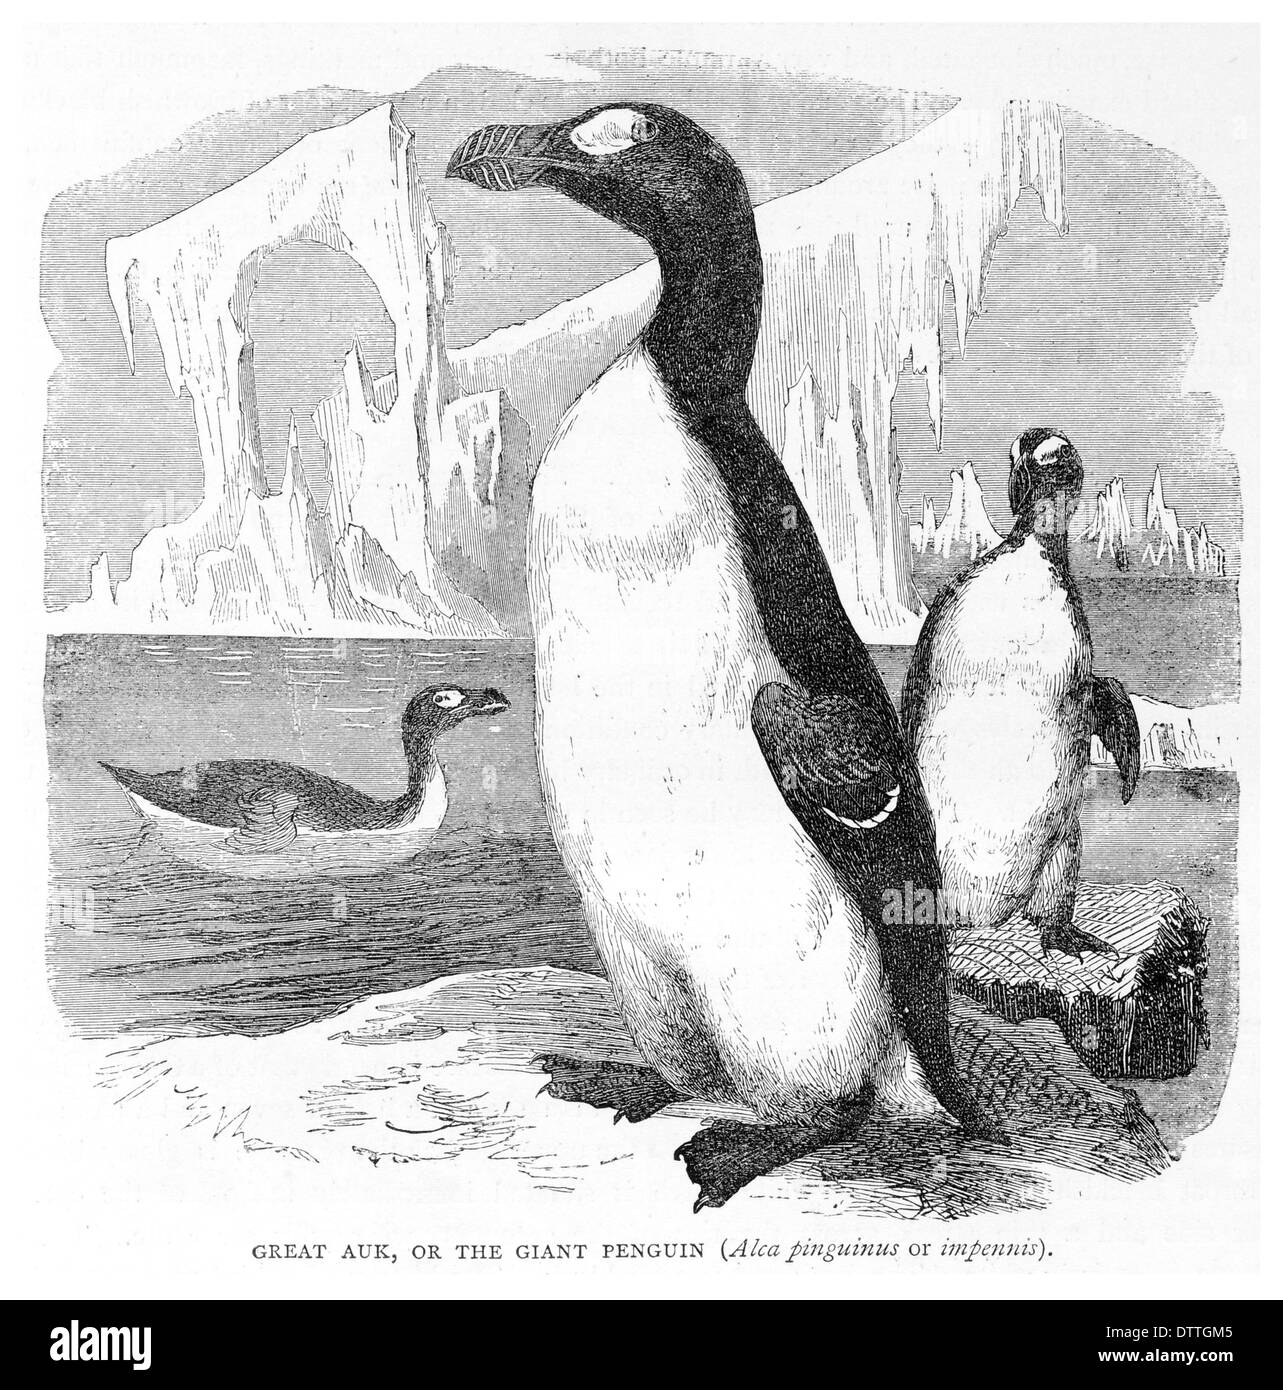 Great Auk or the Giant Penguin Alca pinguinus or impennis Stock Photo